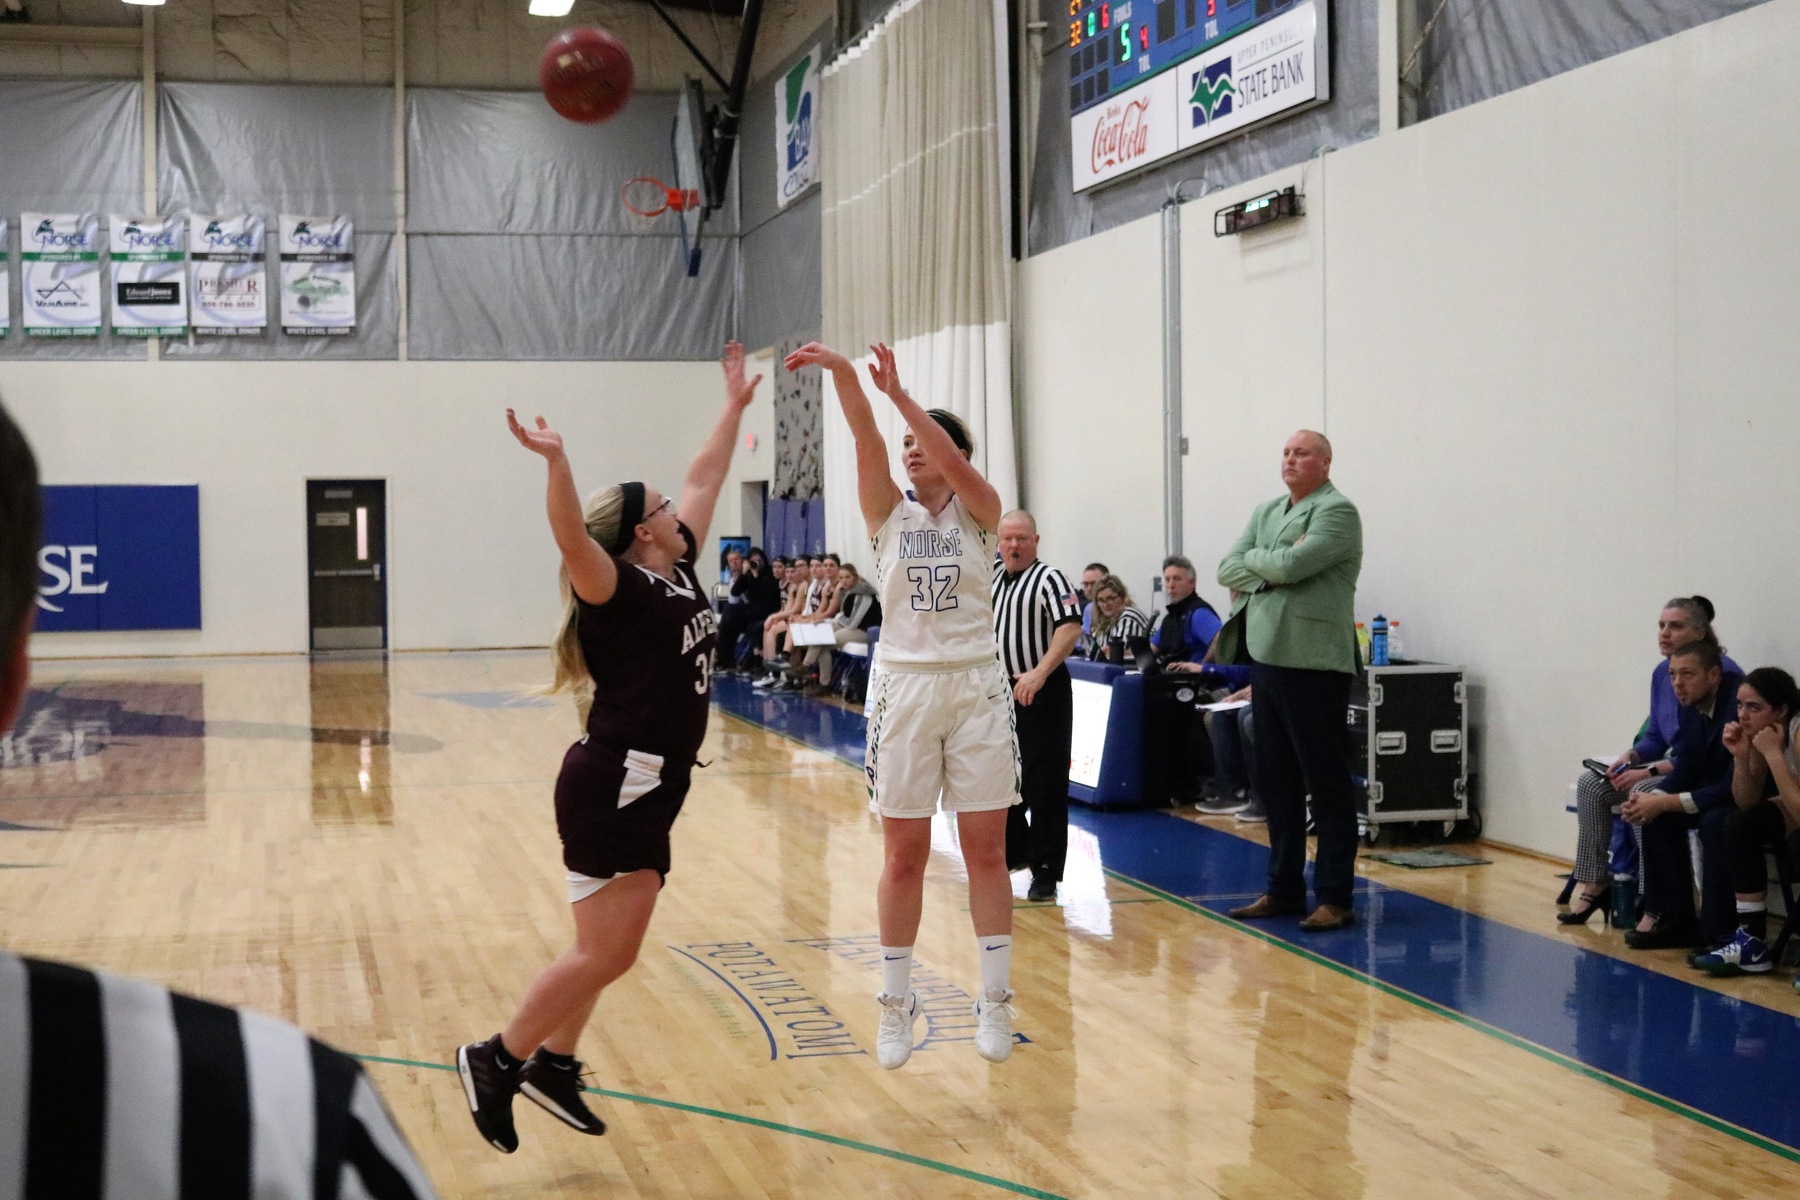 Haley Trudell shooting a three from the wing, a defender closing in